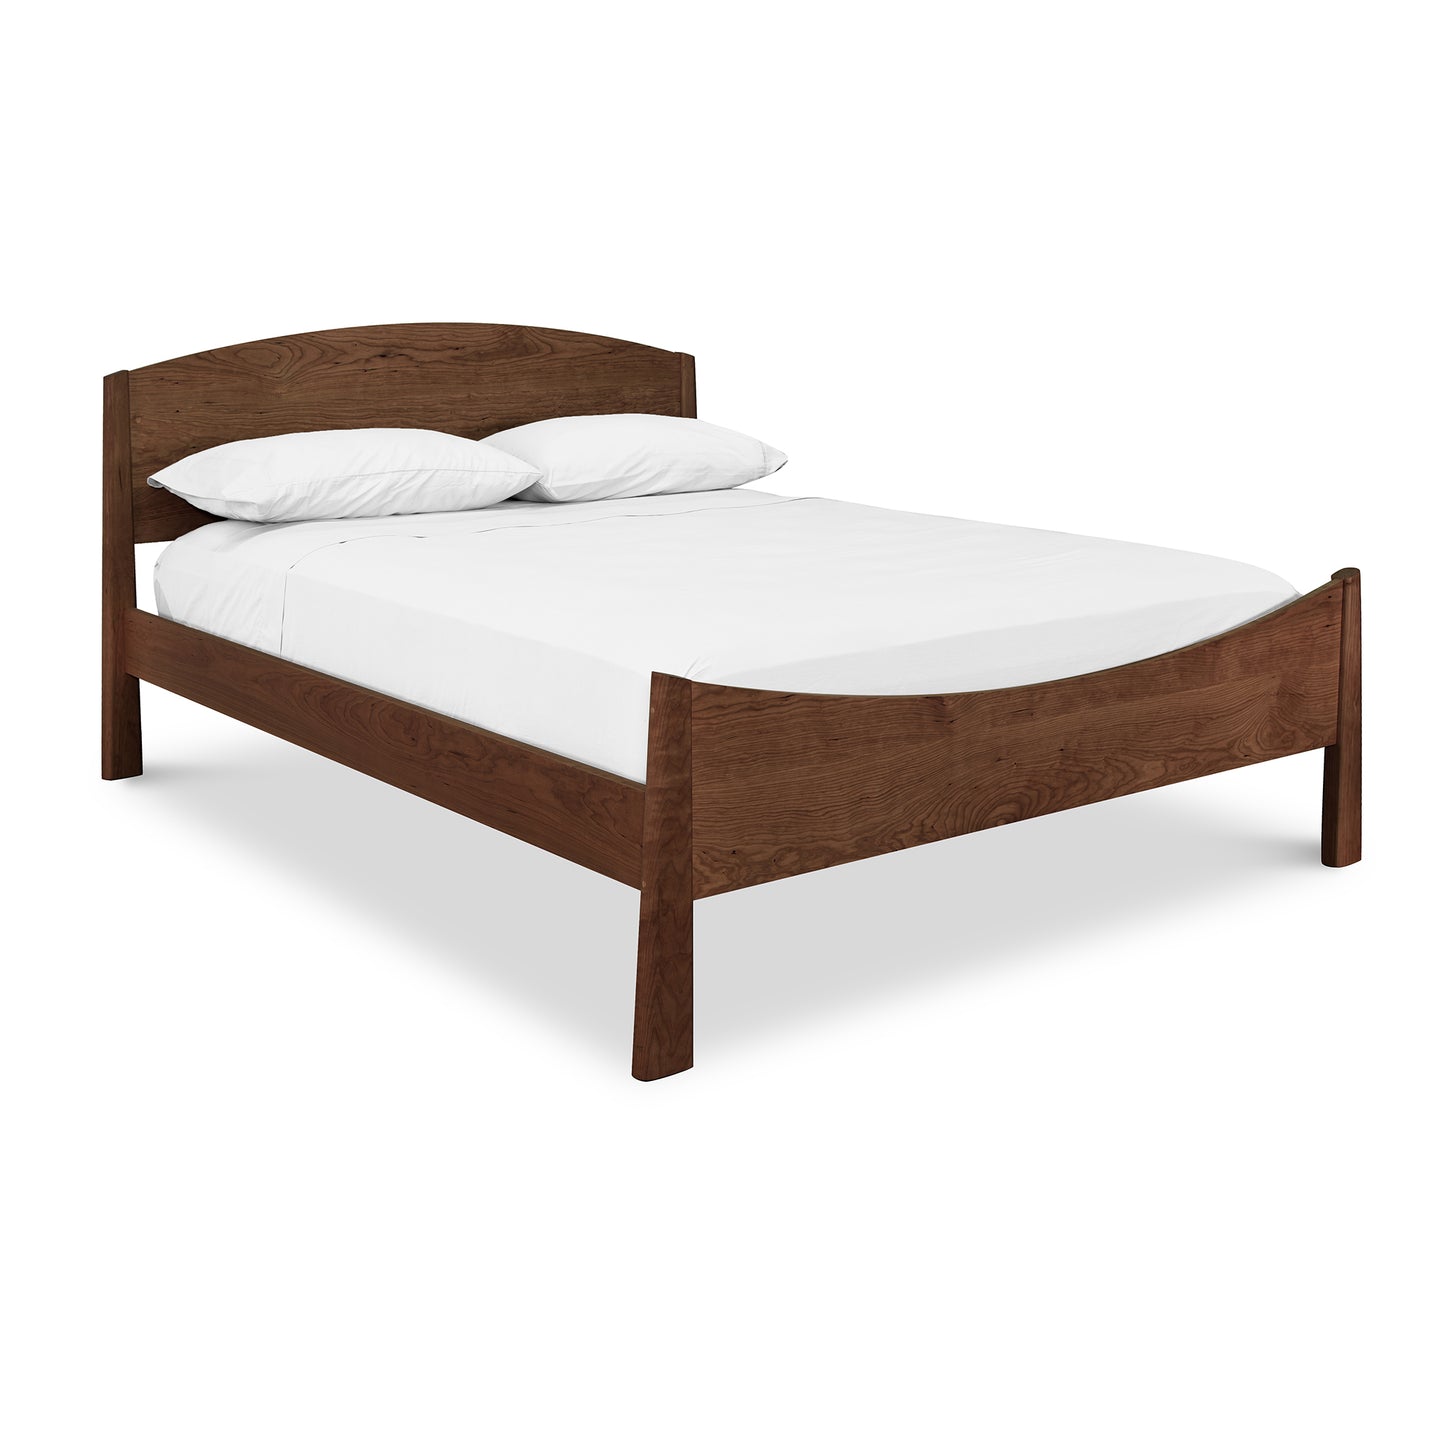 A sustainable bedroom furniture piece featuring a Maple Corner Woodworks Cherry Moon bed frame with a white mattress and two pillows.